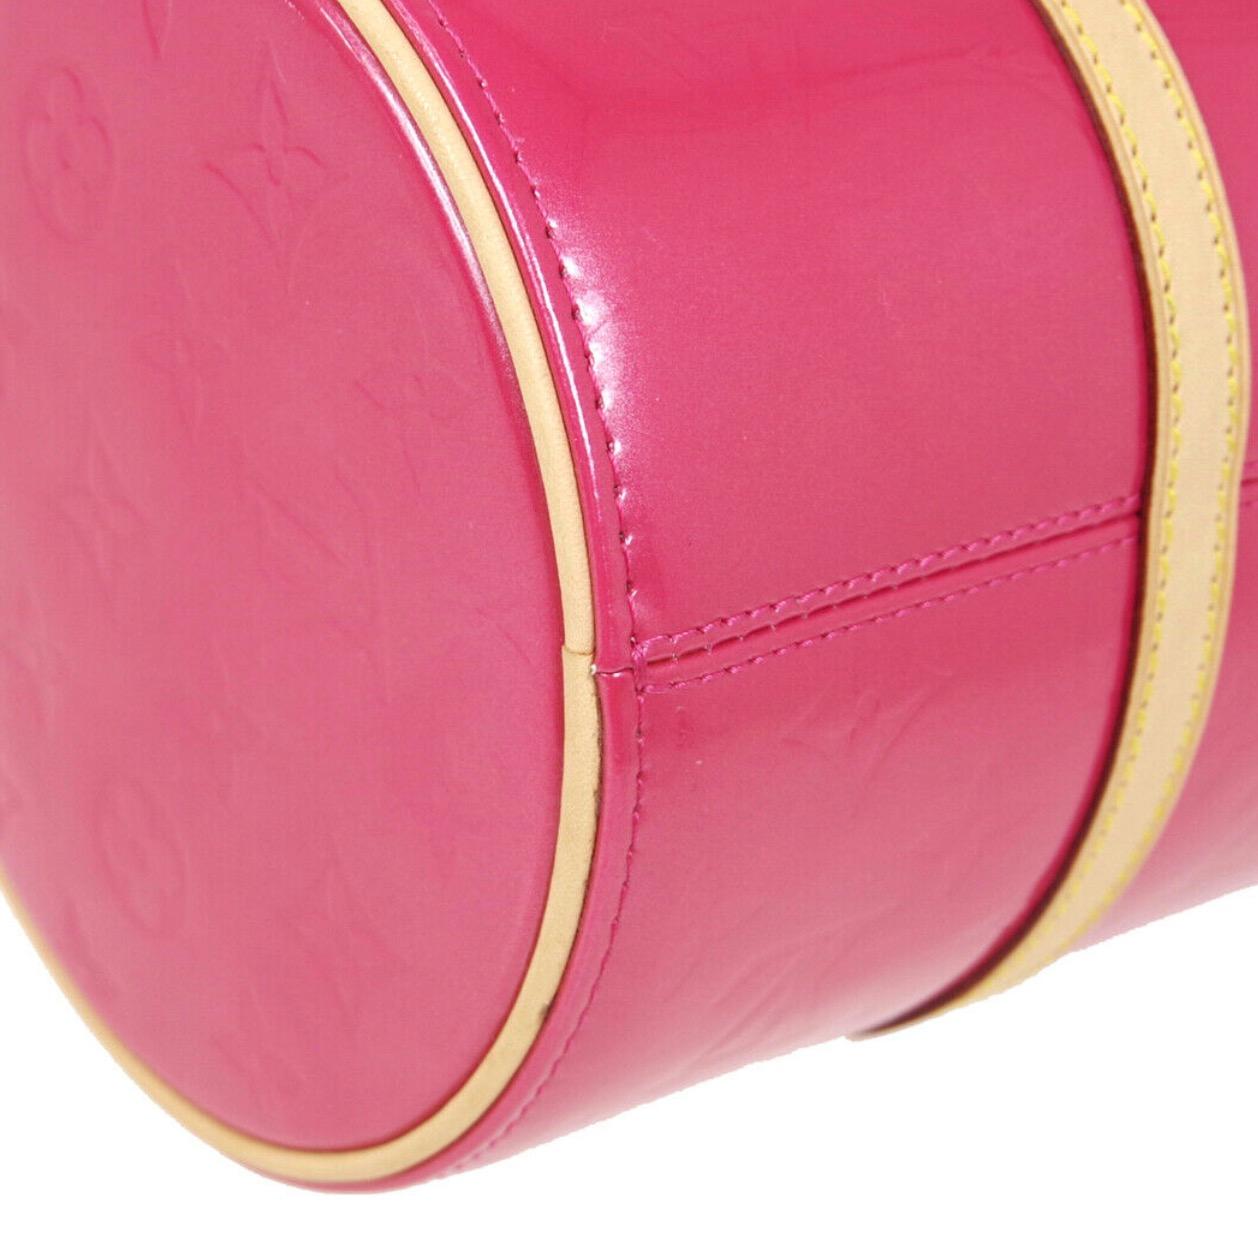 pink patent leather bag